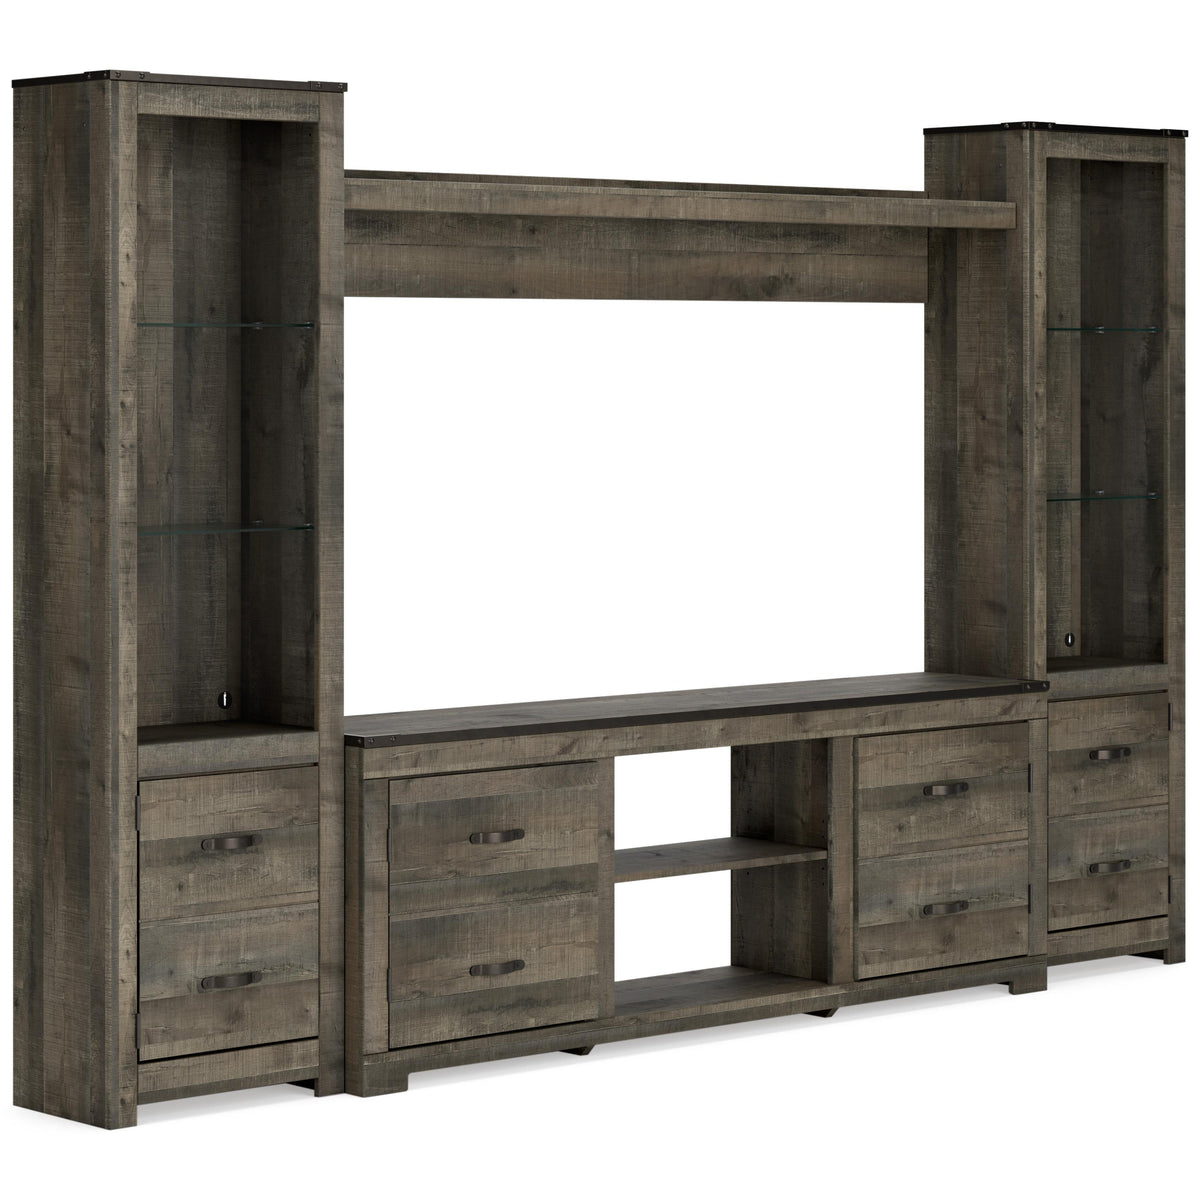 Signature Design by Ashley Trinell W446W13 4 pc Entertainment Center